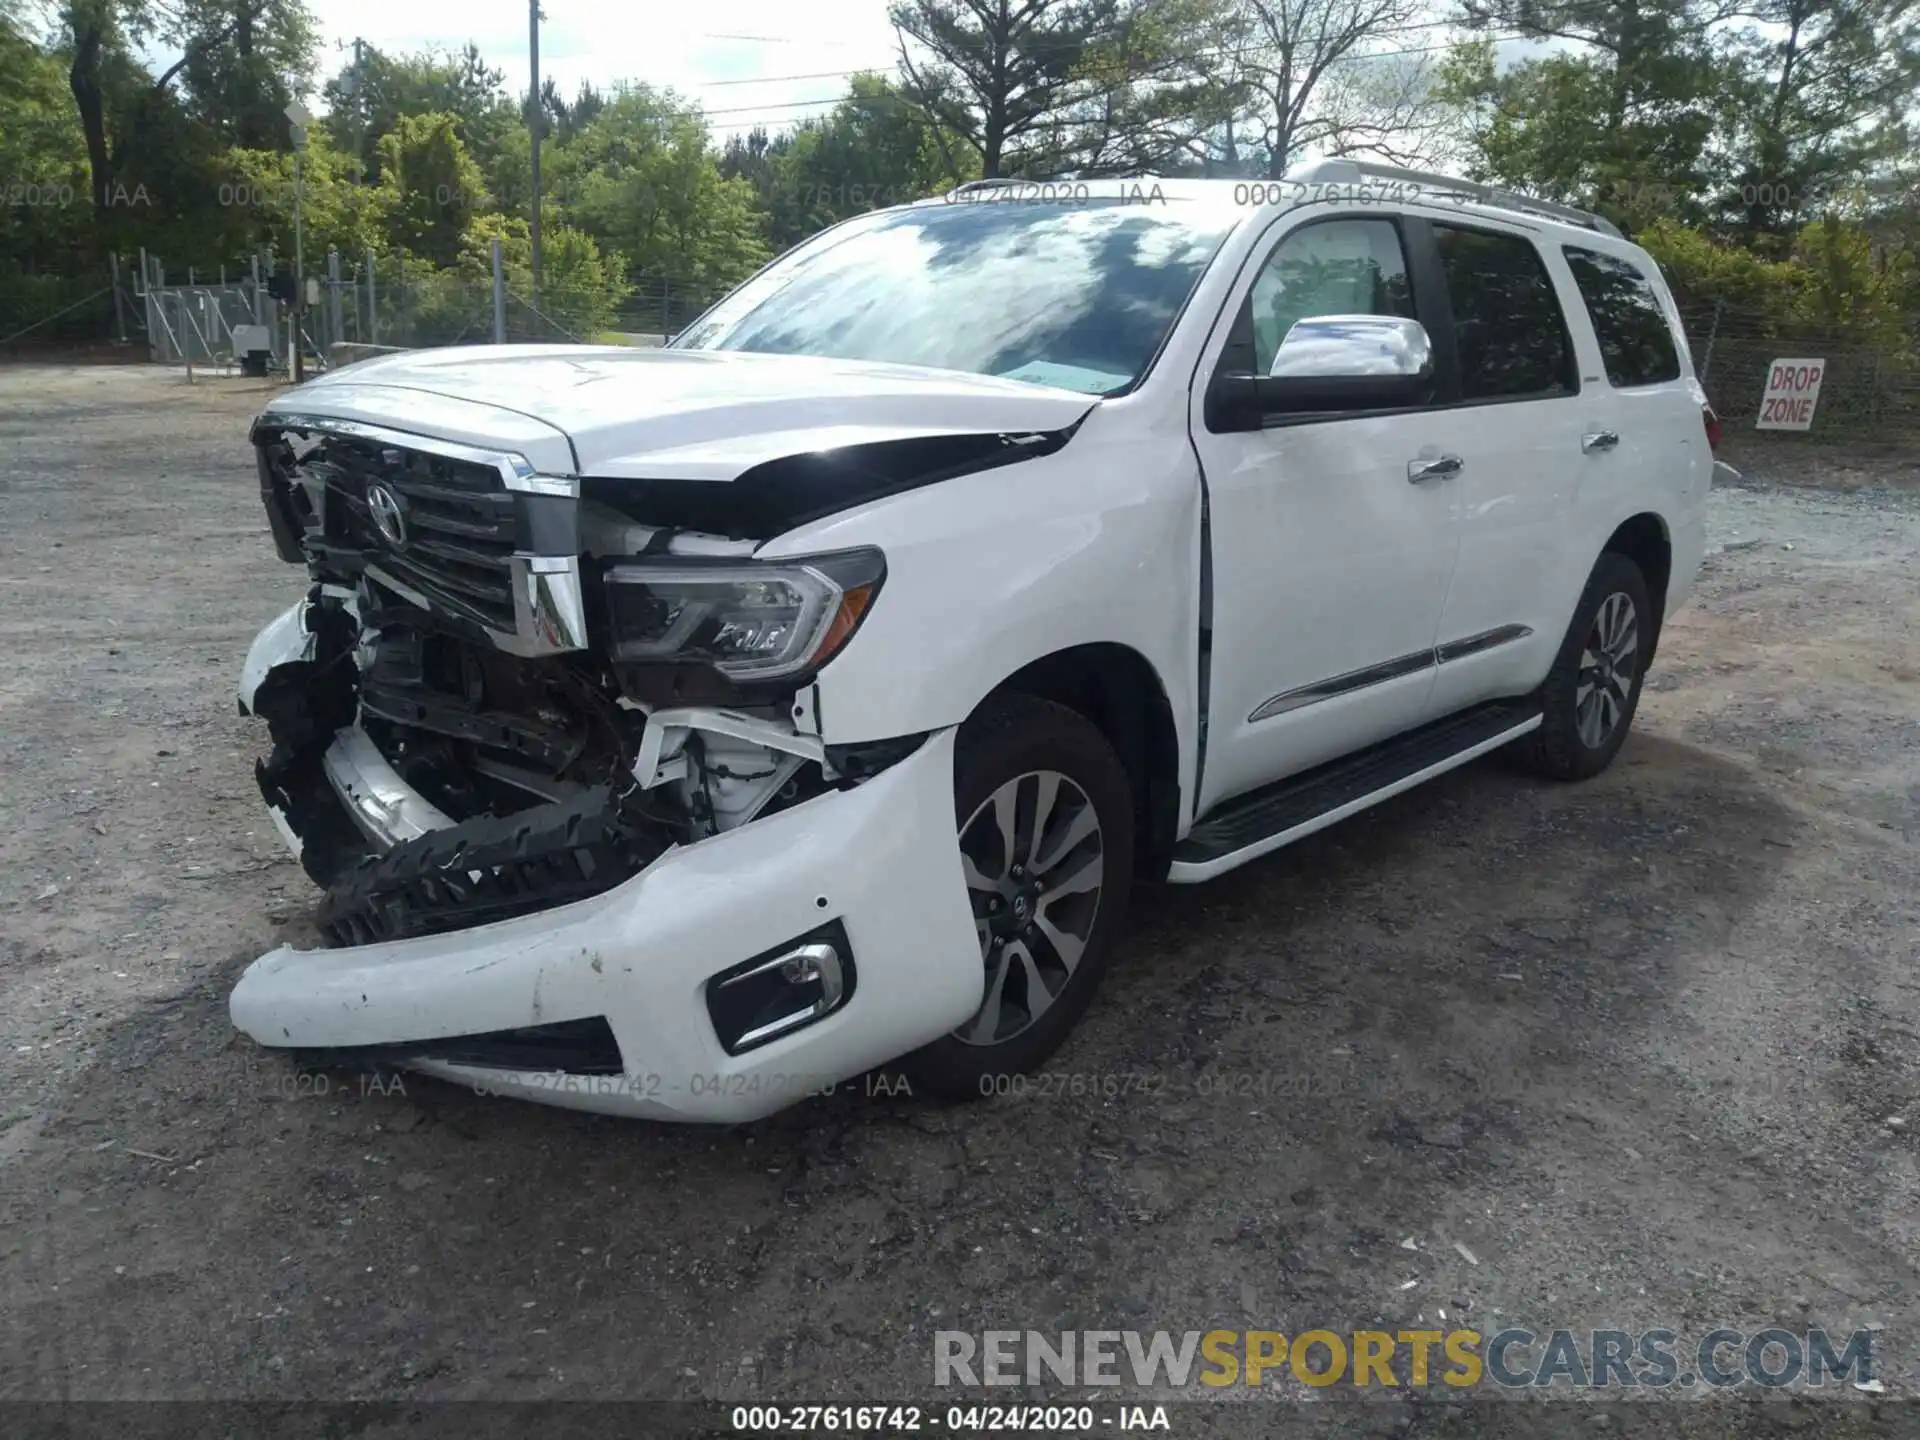 2 Photograph of a damaged car 5TDJY5G12KS171373 TOYOTA SEQUOIA 2019